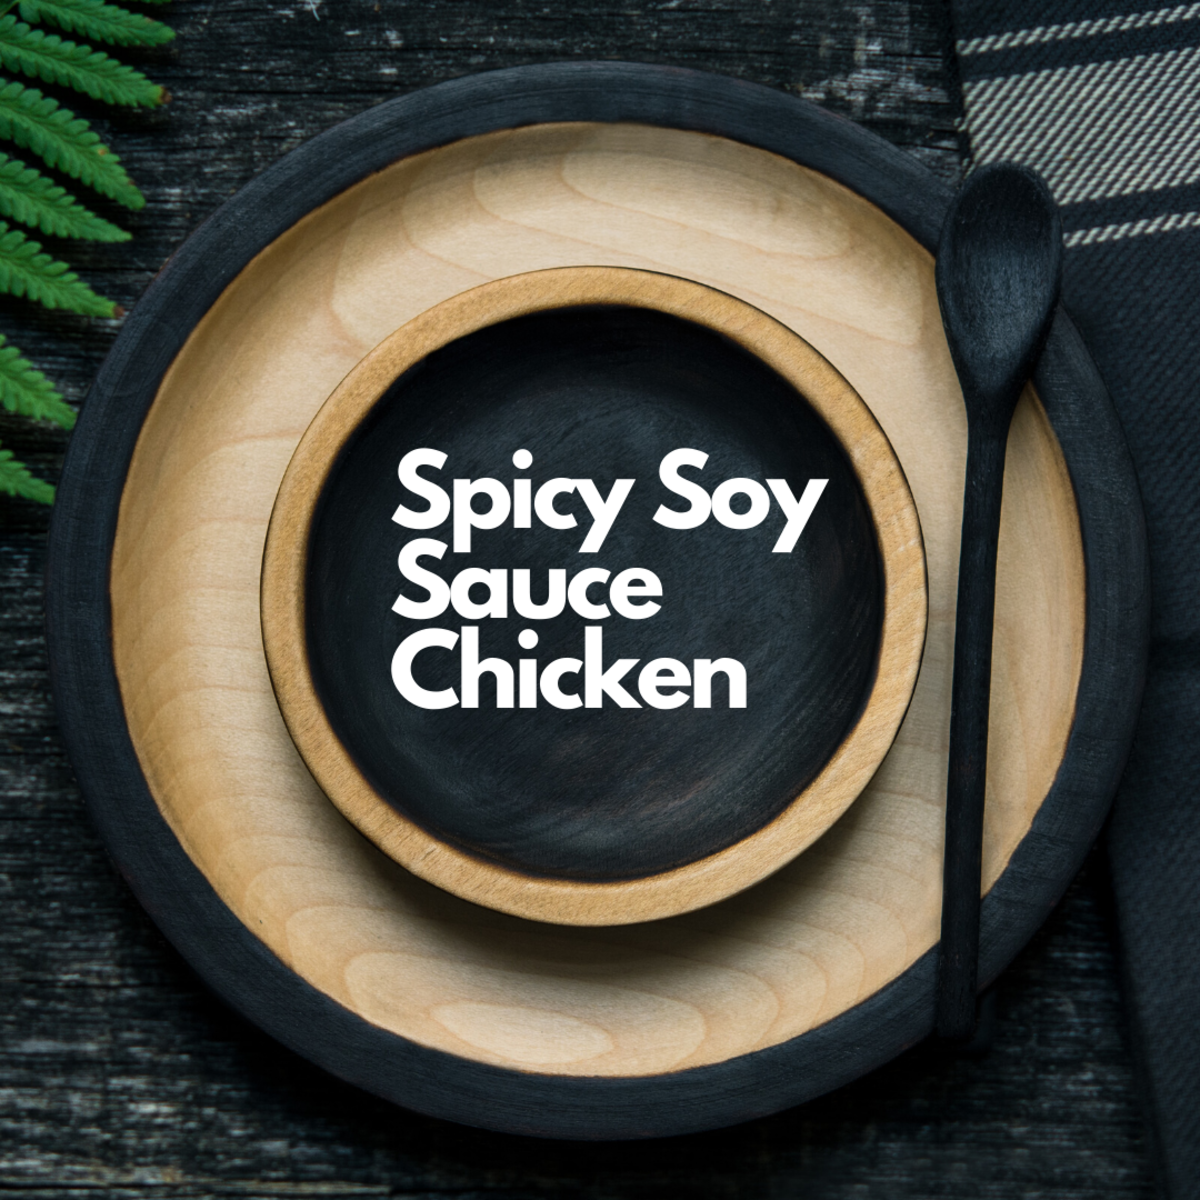 Spicy soy sauce chicken is a delicious and nutritious treat. 